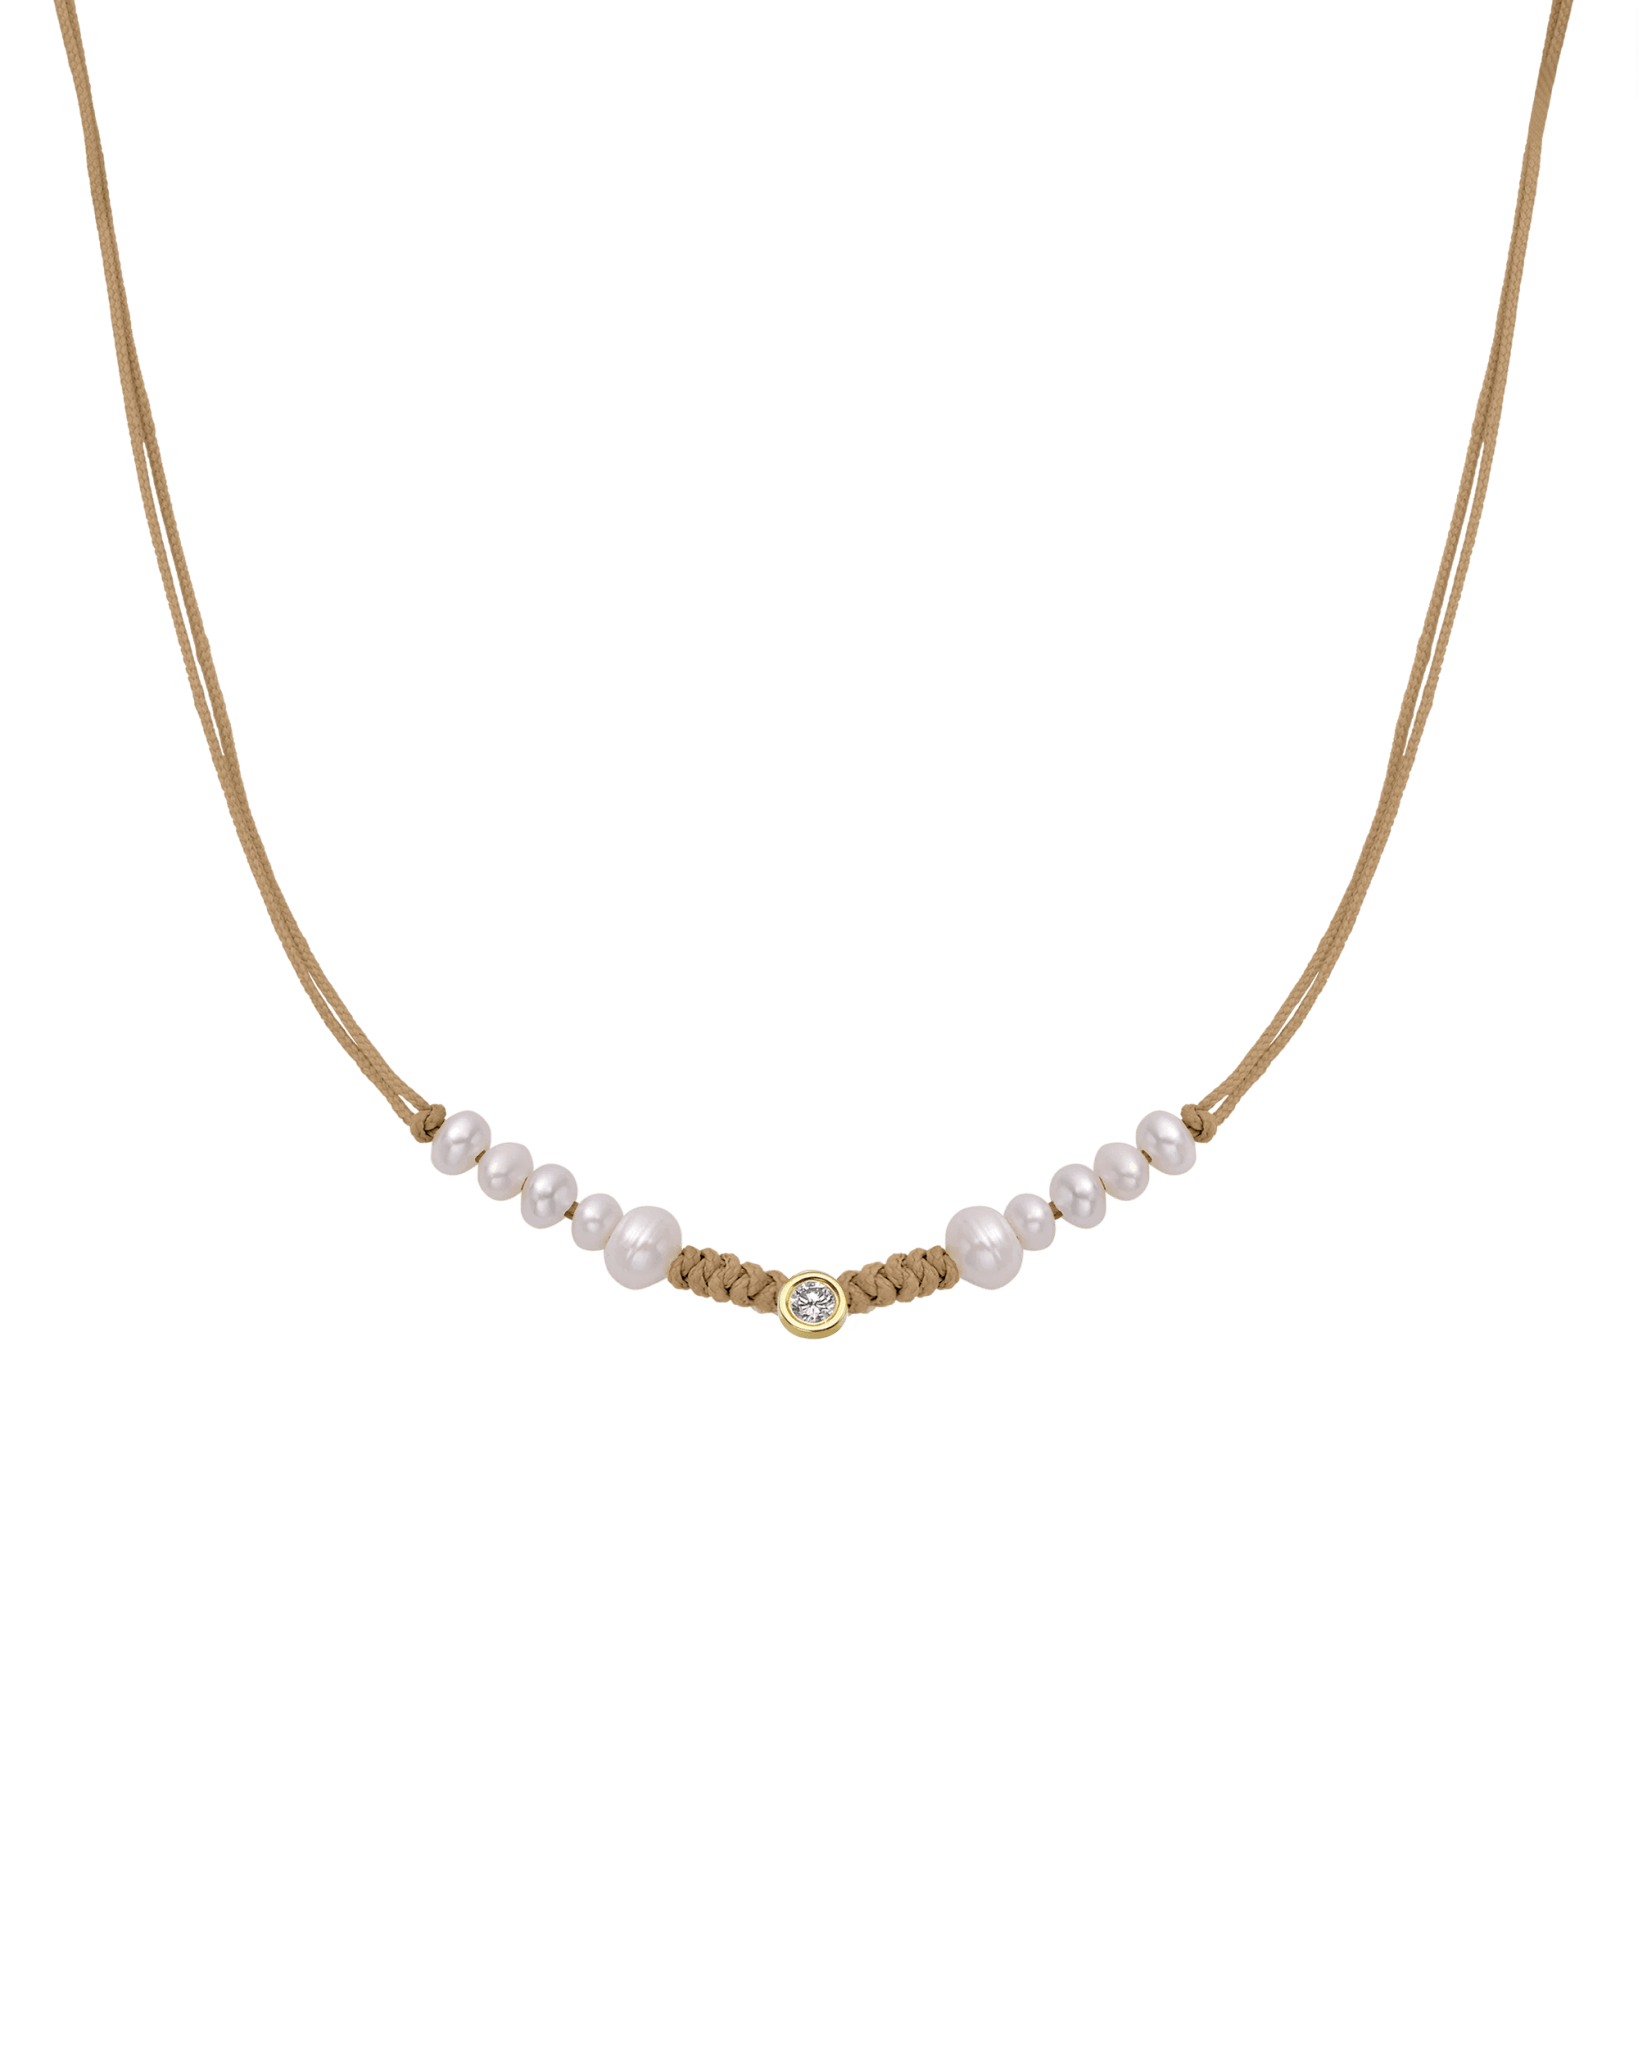 Ten Natural Pearl String of Love Necklace - 14K Yellow Gold Necklaces 14K Solid Gold Camel Large: 0.1ct 